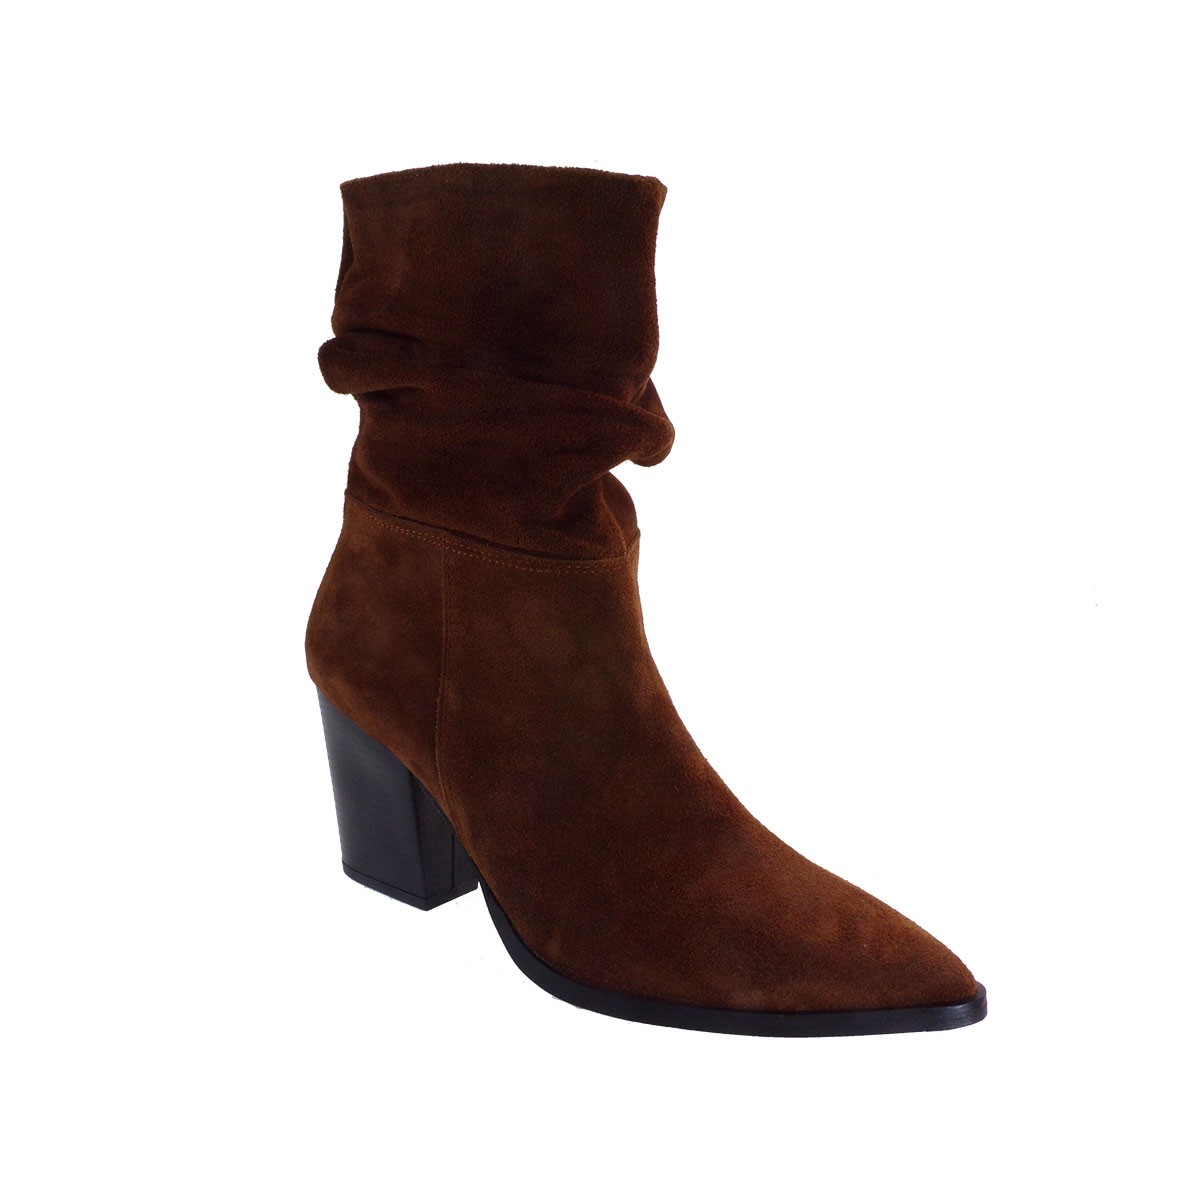 LEATHER SUEDE POINTY TOE BOOTS 7524/1 MOOD'S TABA